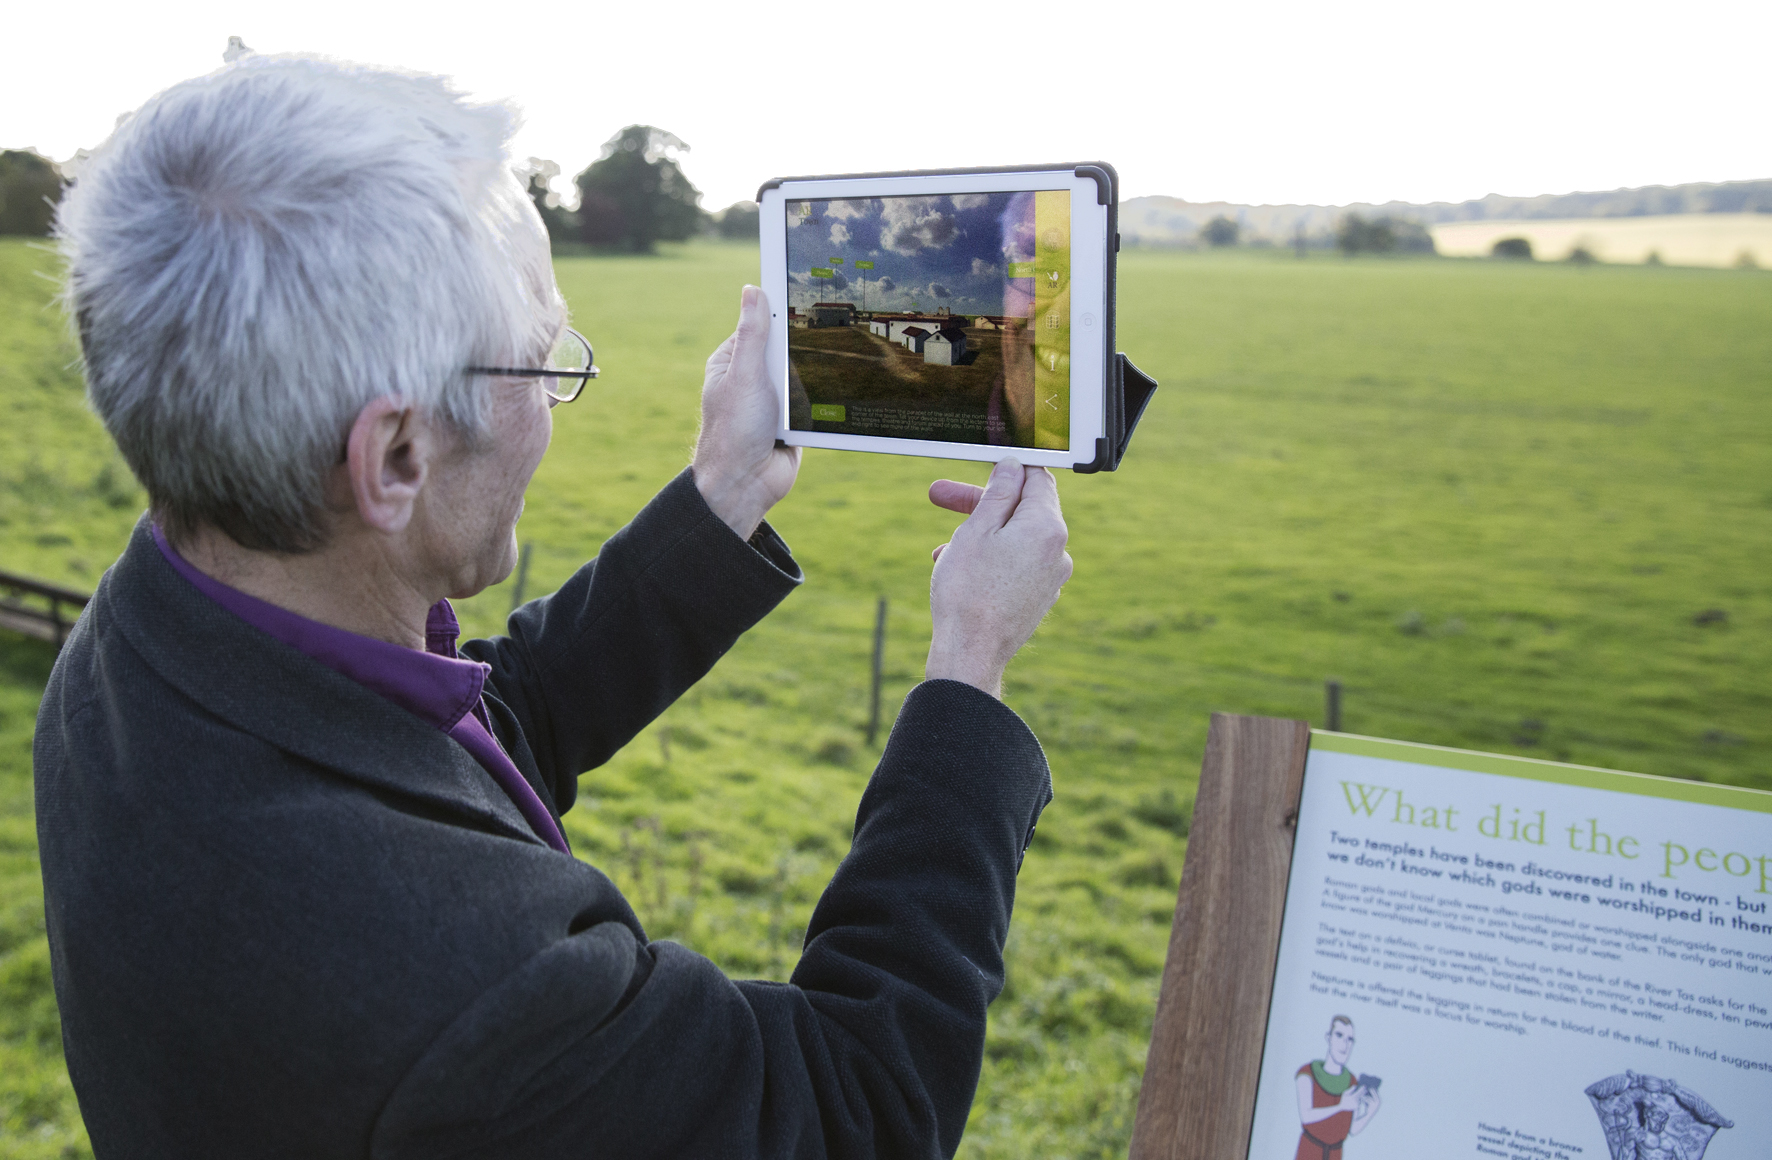 A man looks at an iPad showing a roman town overlaying existing fields